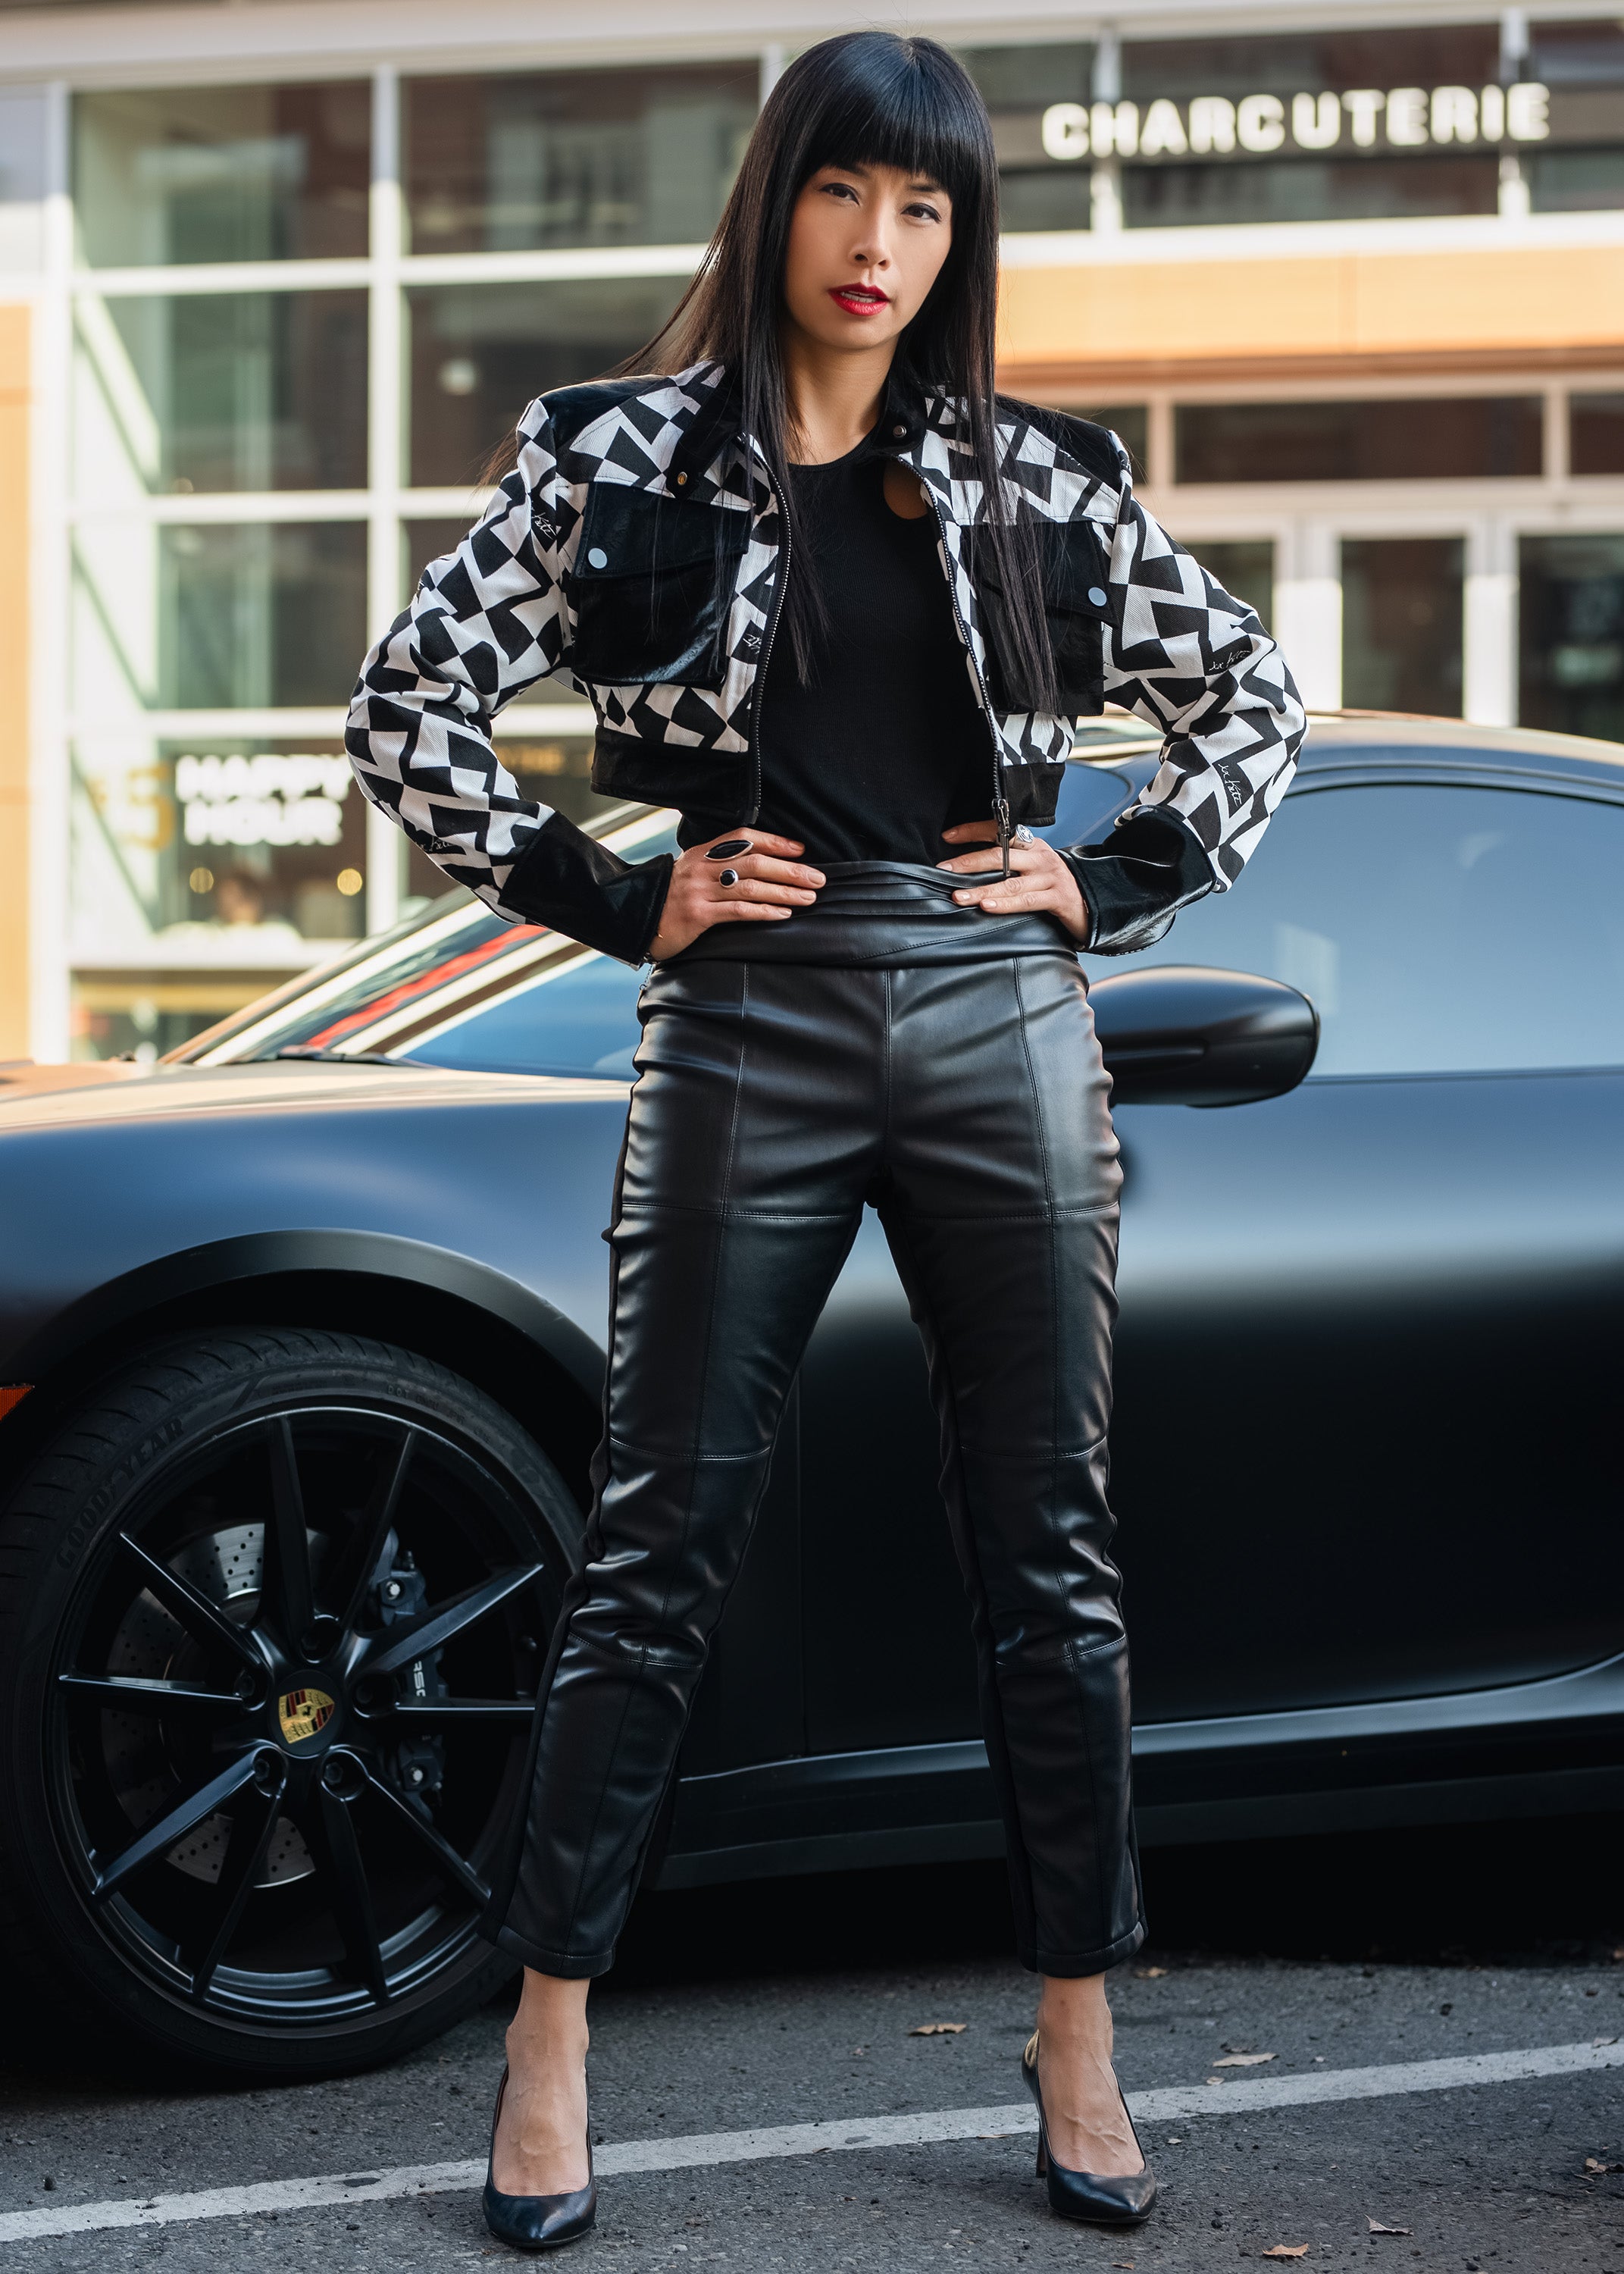 10 Leather Jacket Outfit Ideas for Women - How to Wear a Leather